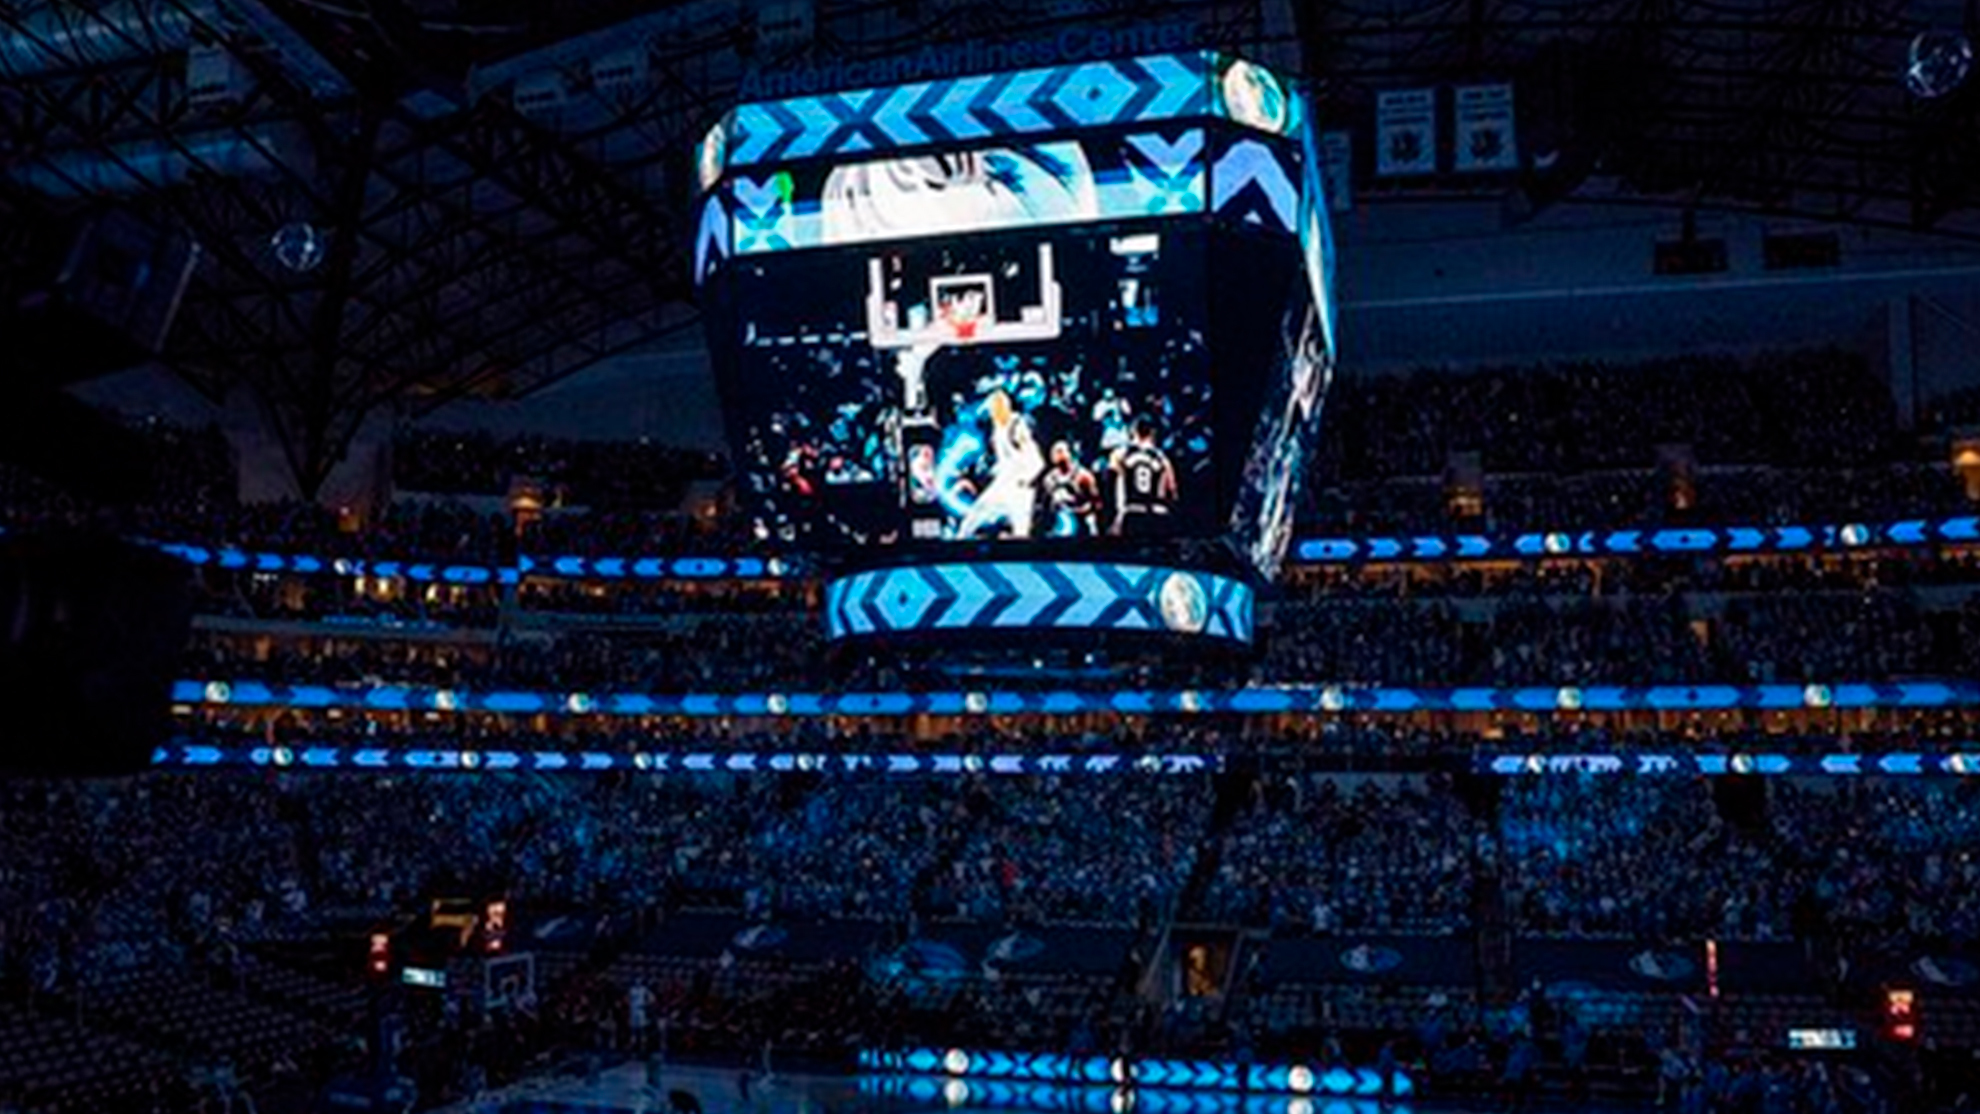 Jbrjshti Bjpuei Xxx Video 1 5 Yos - 15-year-old girl kidnapped at Mavericks game was sexually abused for 10  days | Marca